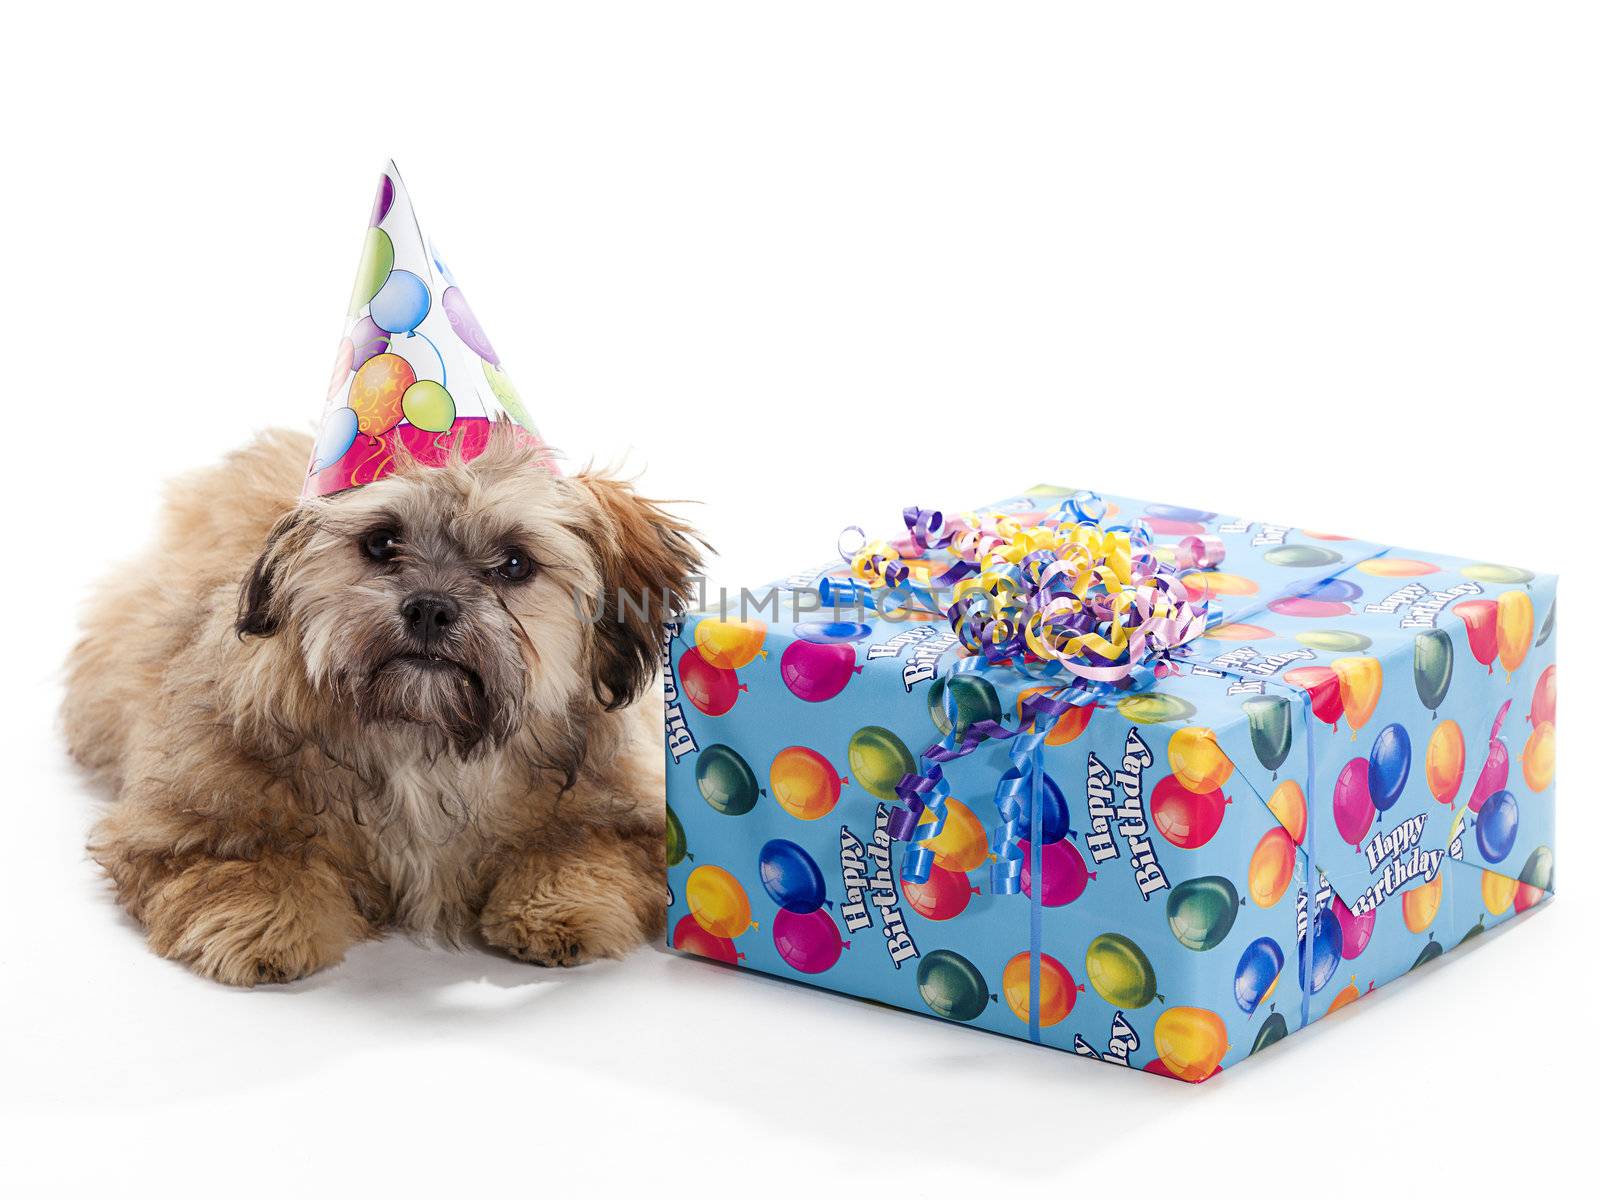 A Shitzu Poodle mix laying beside a birthday present wearing a hat